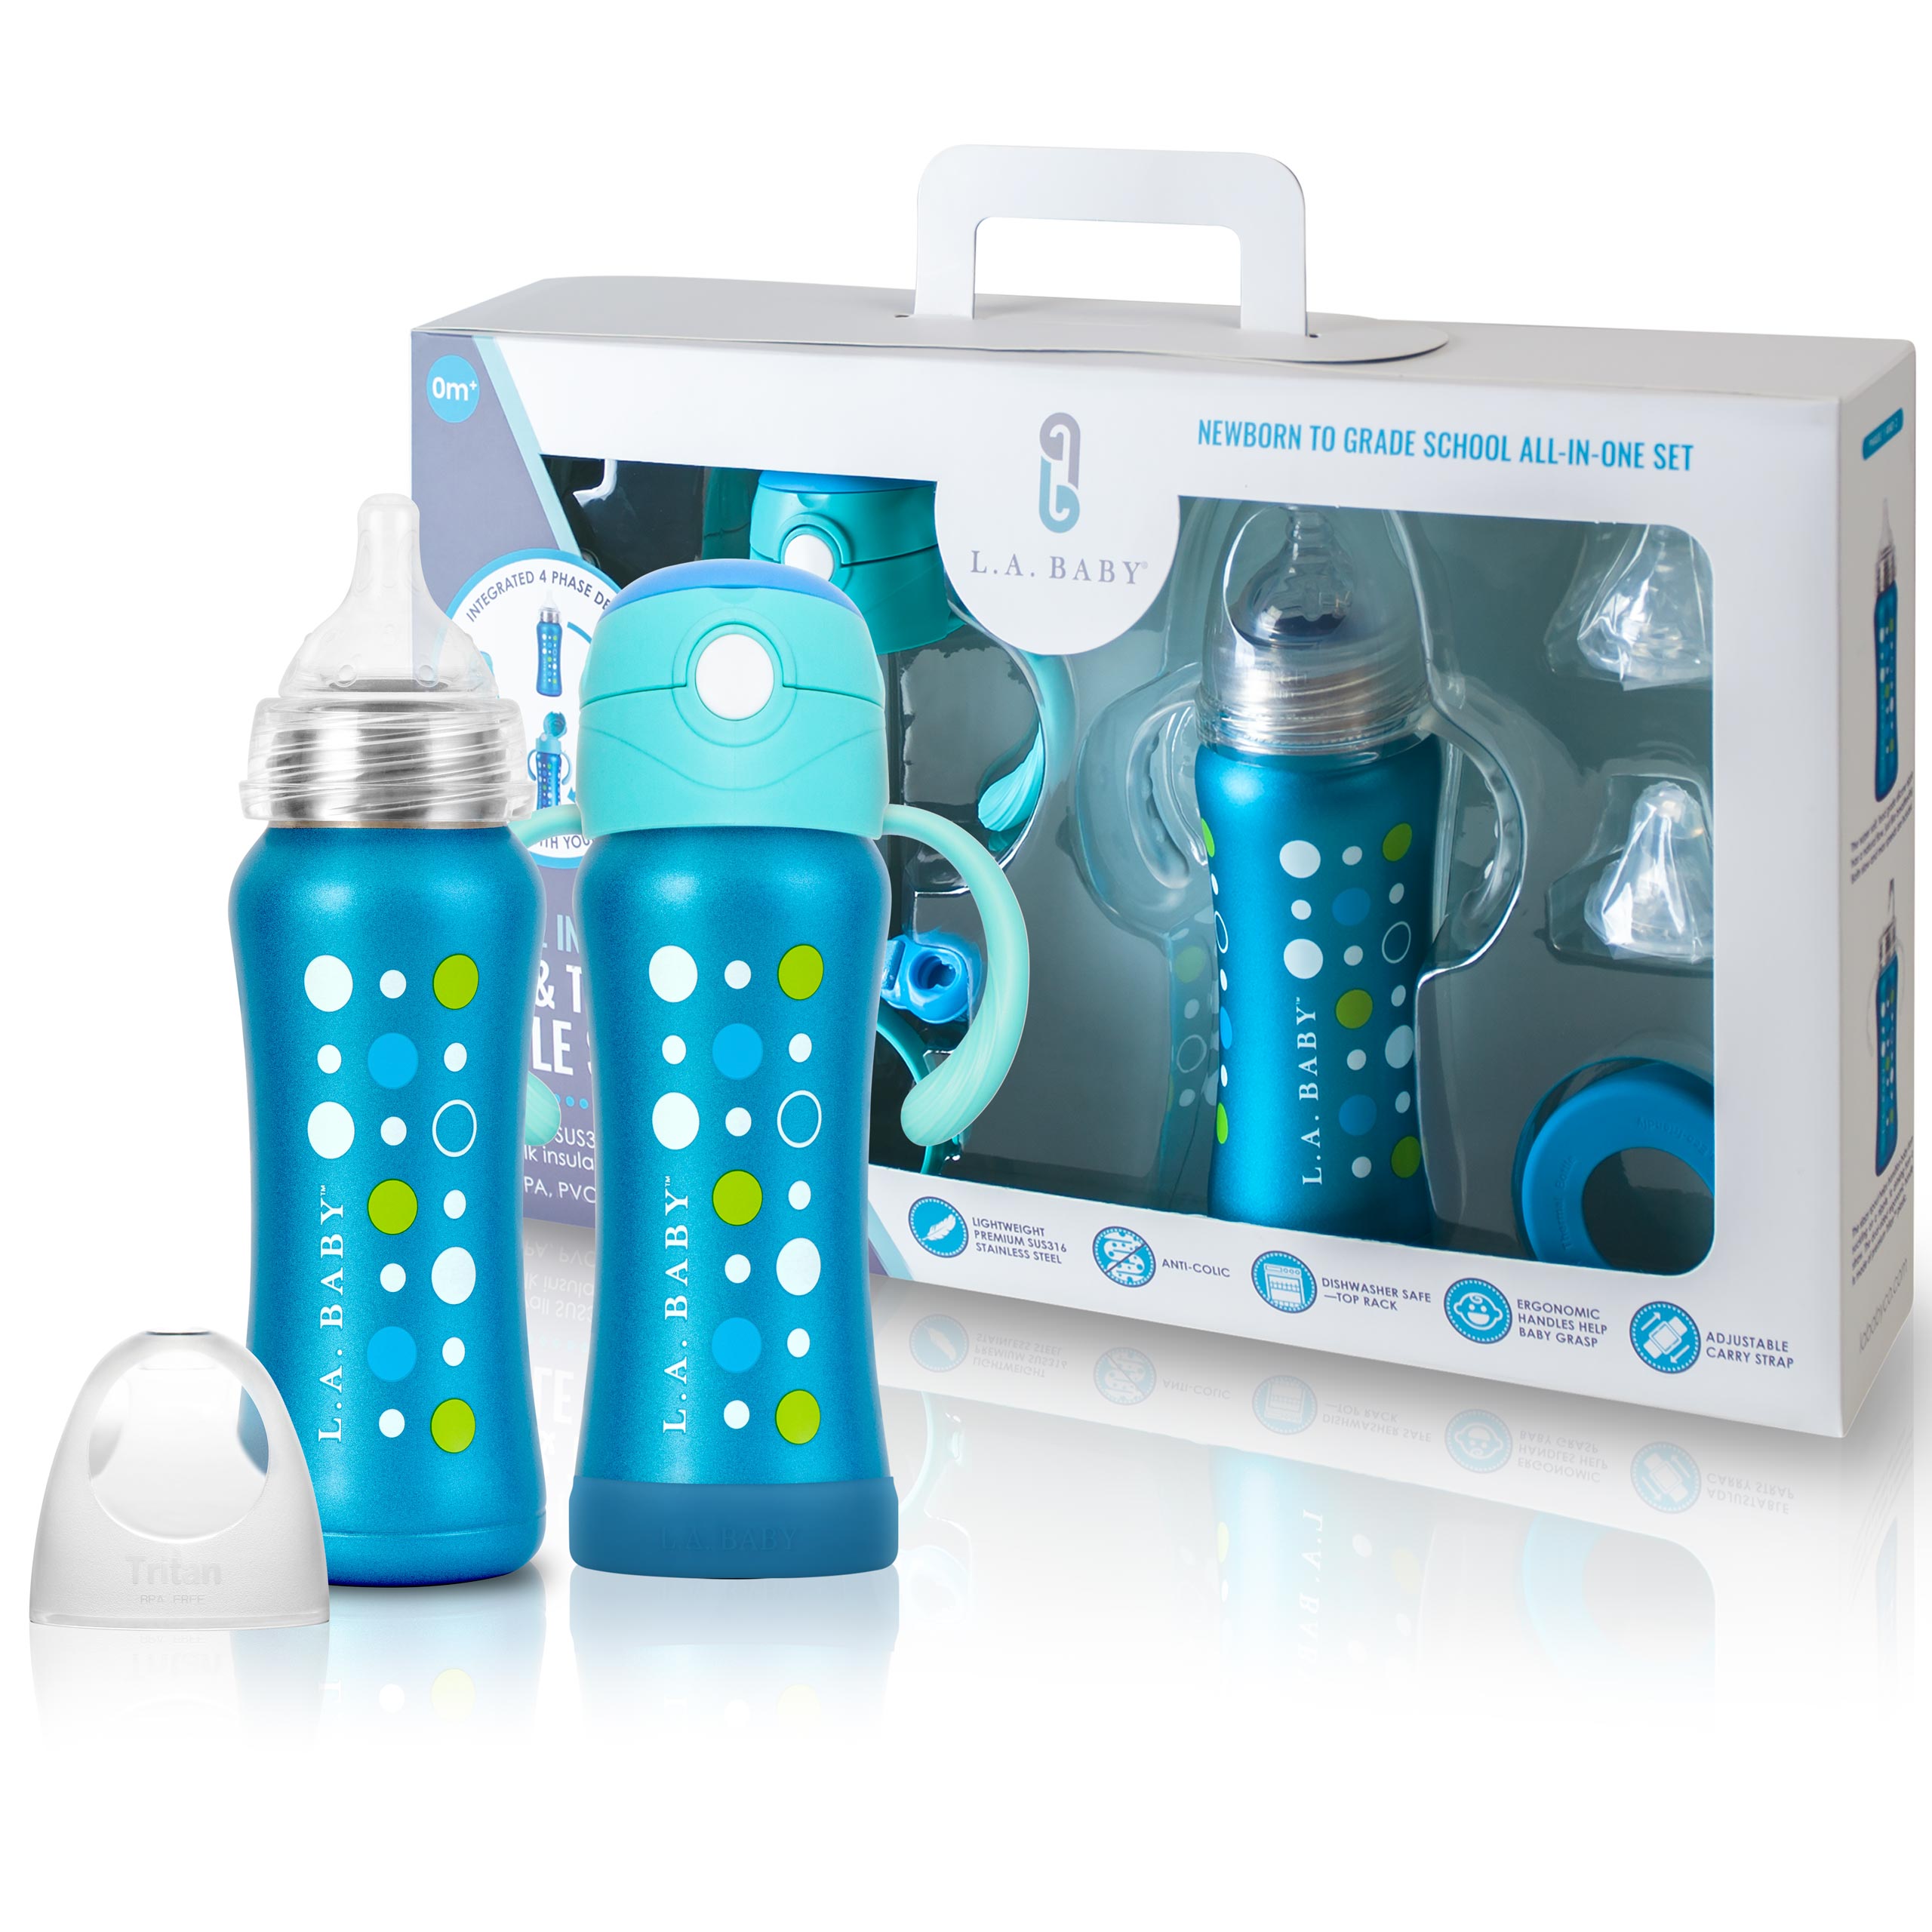 L.A. Baby’s Ultimate 9oz Stainless Steel Baby Bottle, Sippy Cup, Insulated Toddler Water Bottle All-in-1 Set